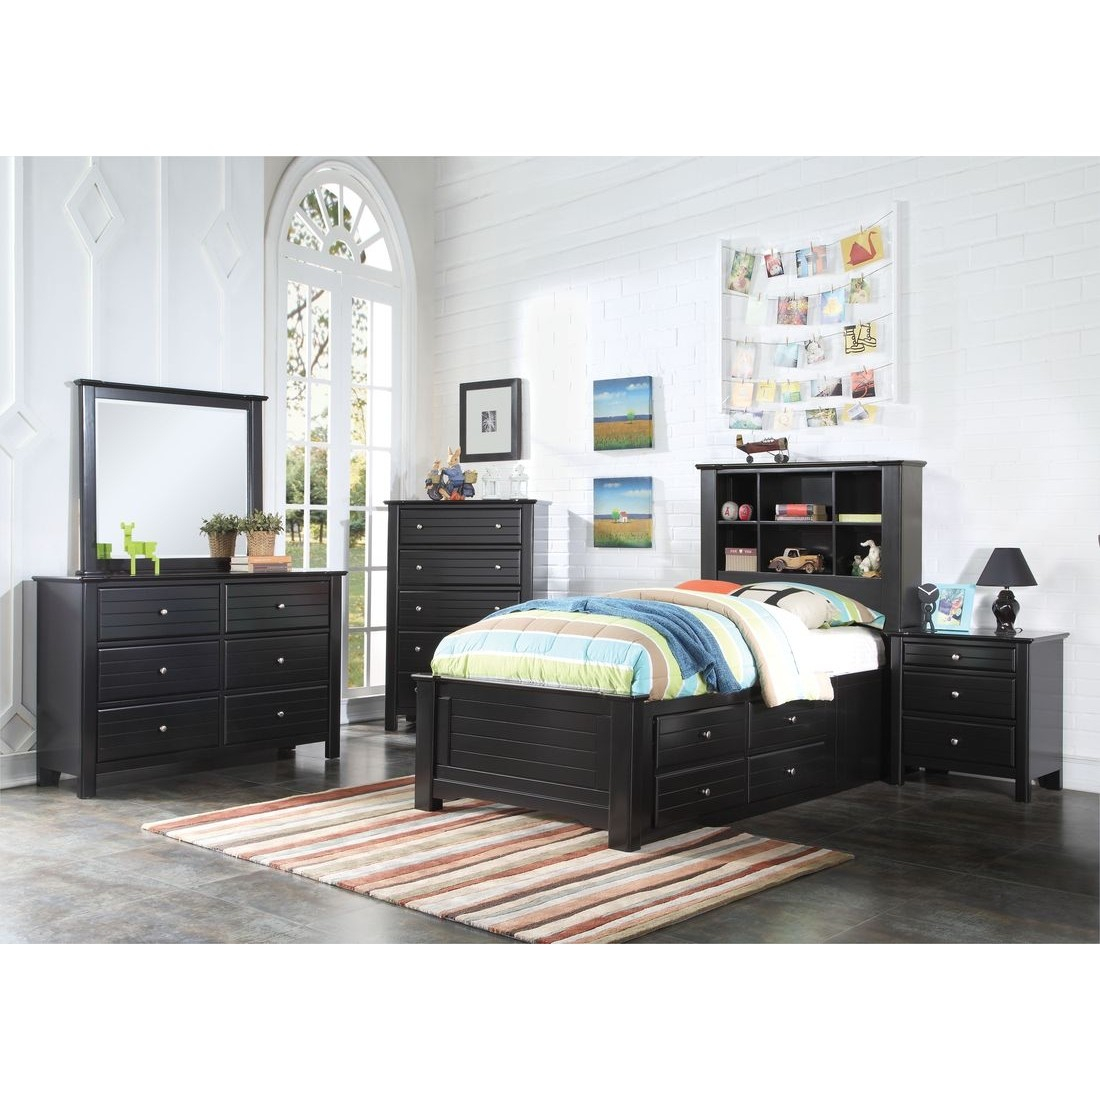 Acme Mallowsea 4pc Full Bedroom Set With Storage Rail In Black throughout sizing 1100 X 1100